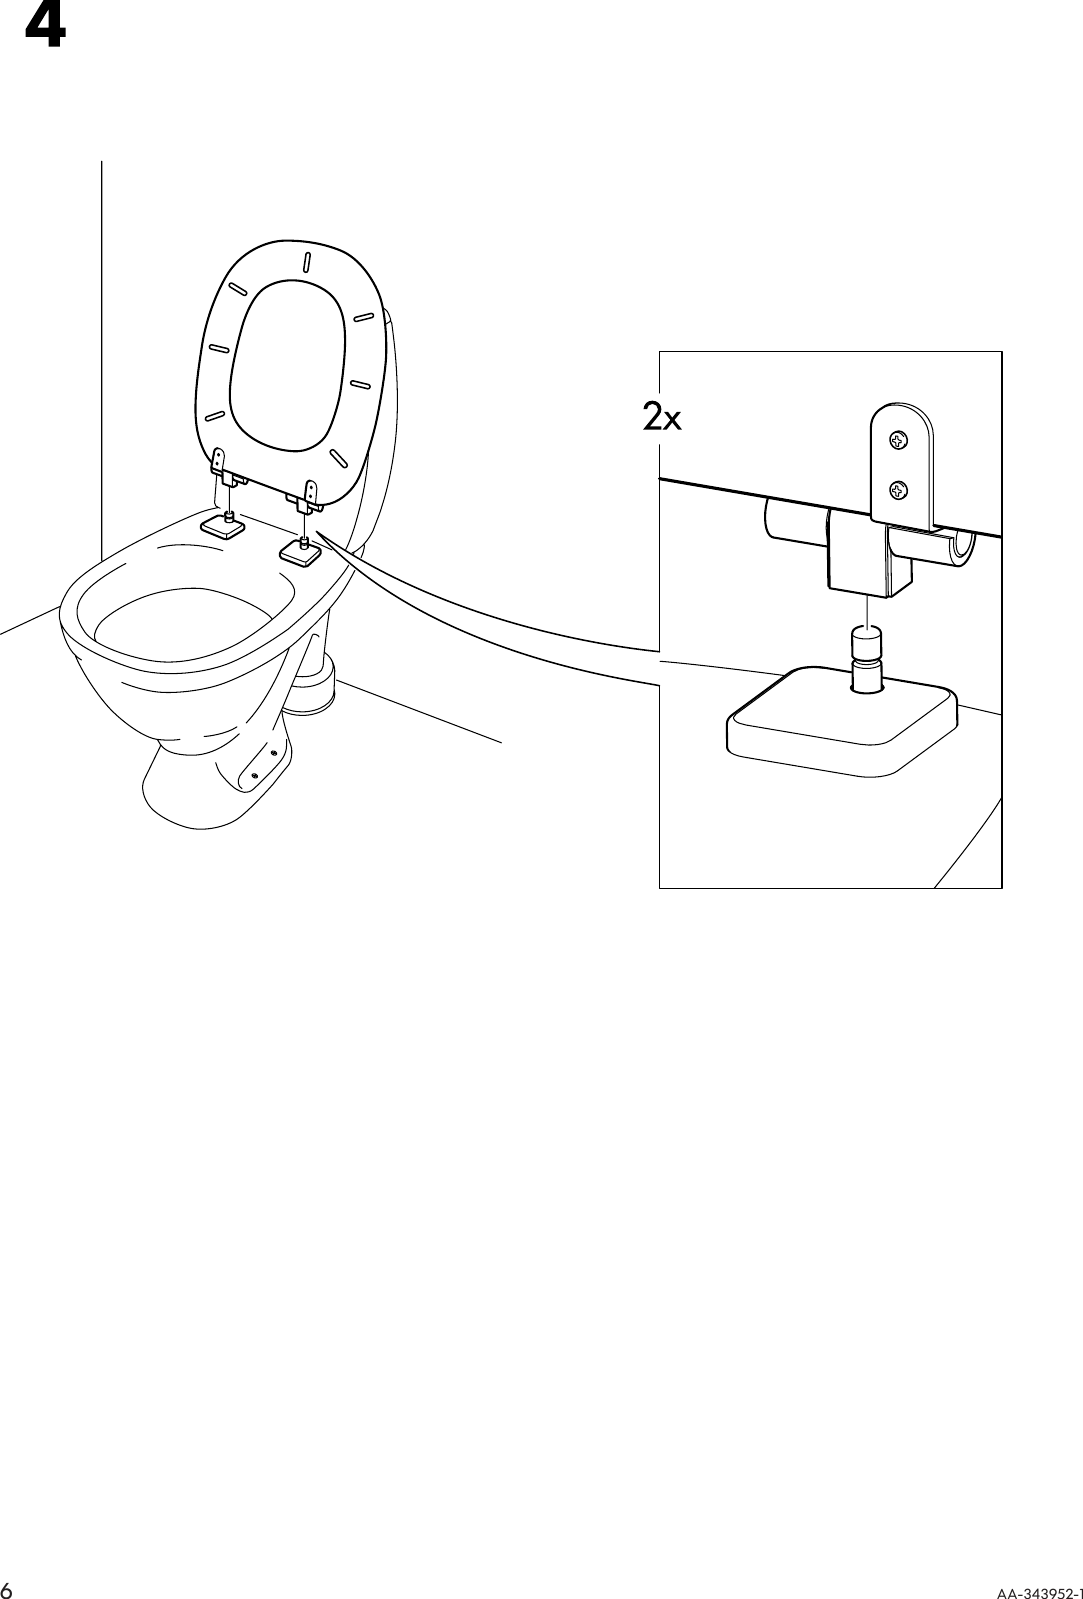 Page 6 of 8 - Ikea Ikea-Freden-Toilet-Seat-Assembly-Instruction